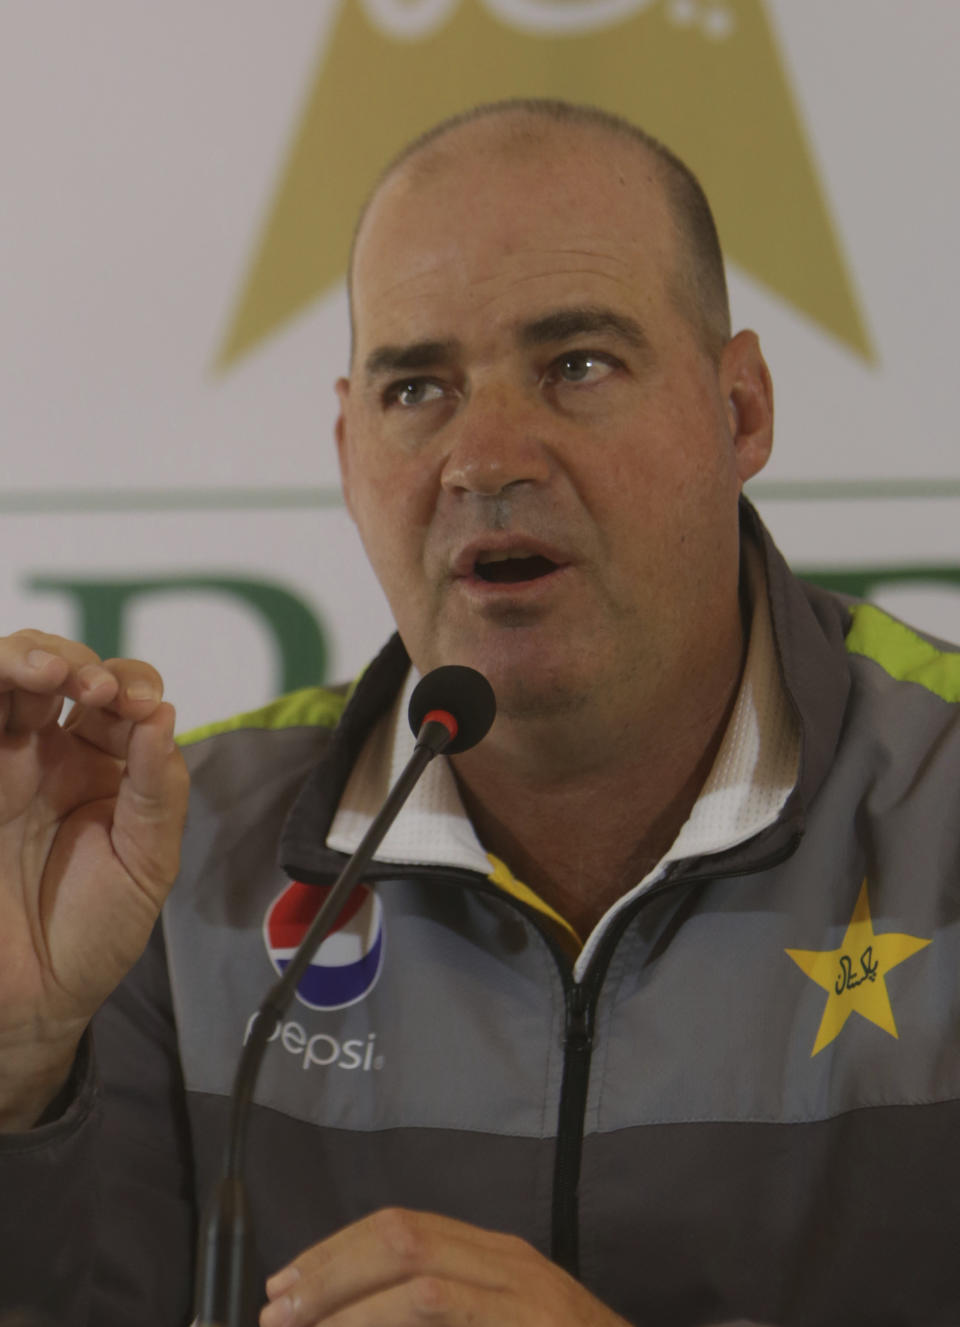 Pakistan cricket team coach Mickey Arthur addresses a news conference in Lahore, Pakistan, Friday, Feb. 8, 2019. Arthur says it's time to move on from captain Sarfraz Ahmed's four-match ban for a racial taunt and concentrate on finalizing the team for the Cricket World Cup. (AP Photo/K.M. Chaudary)